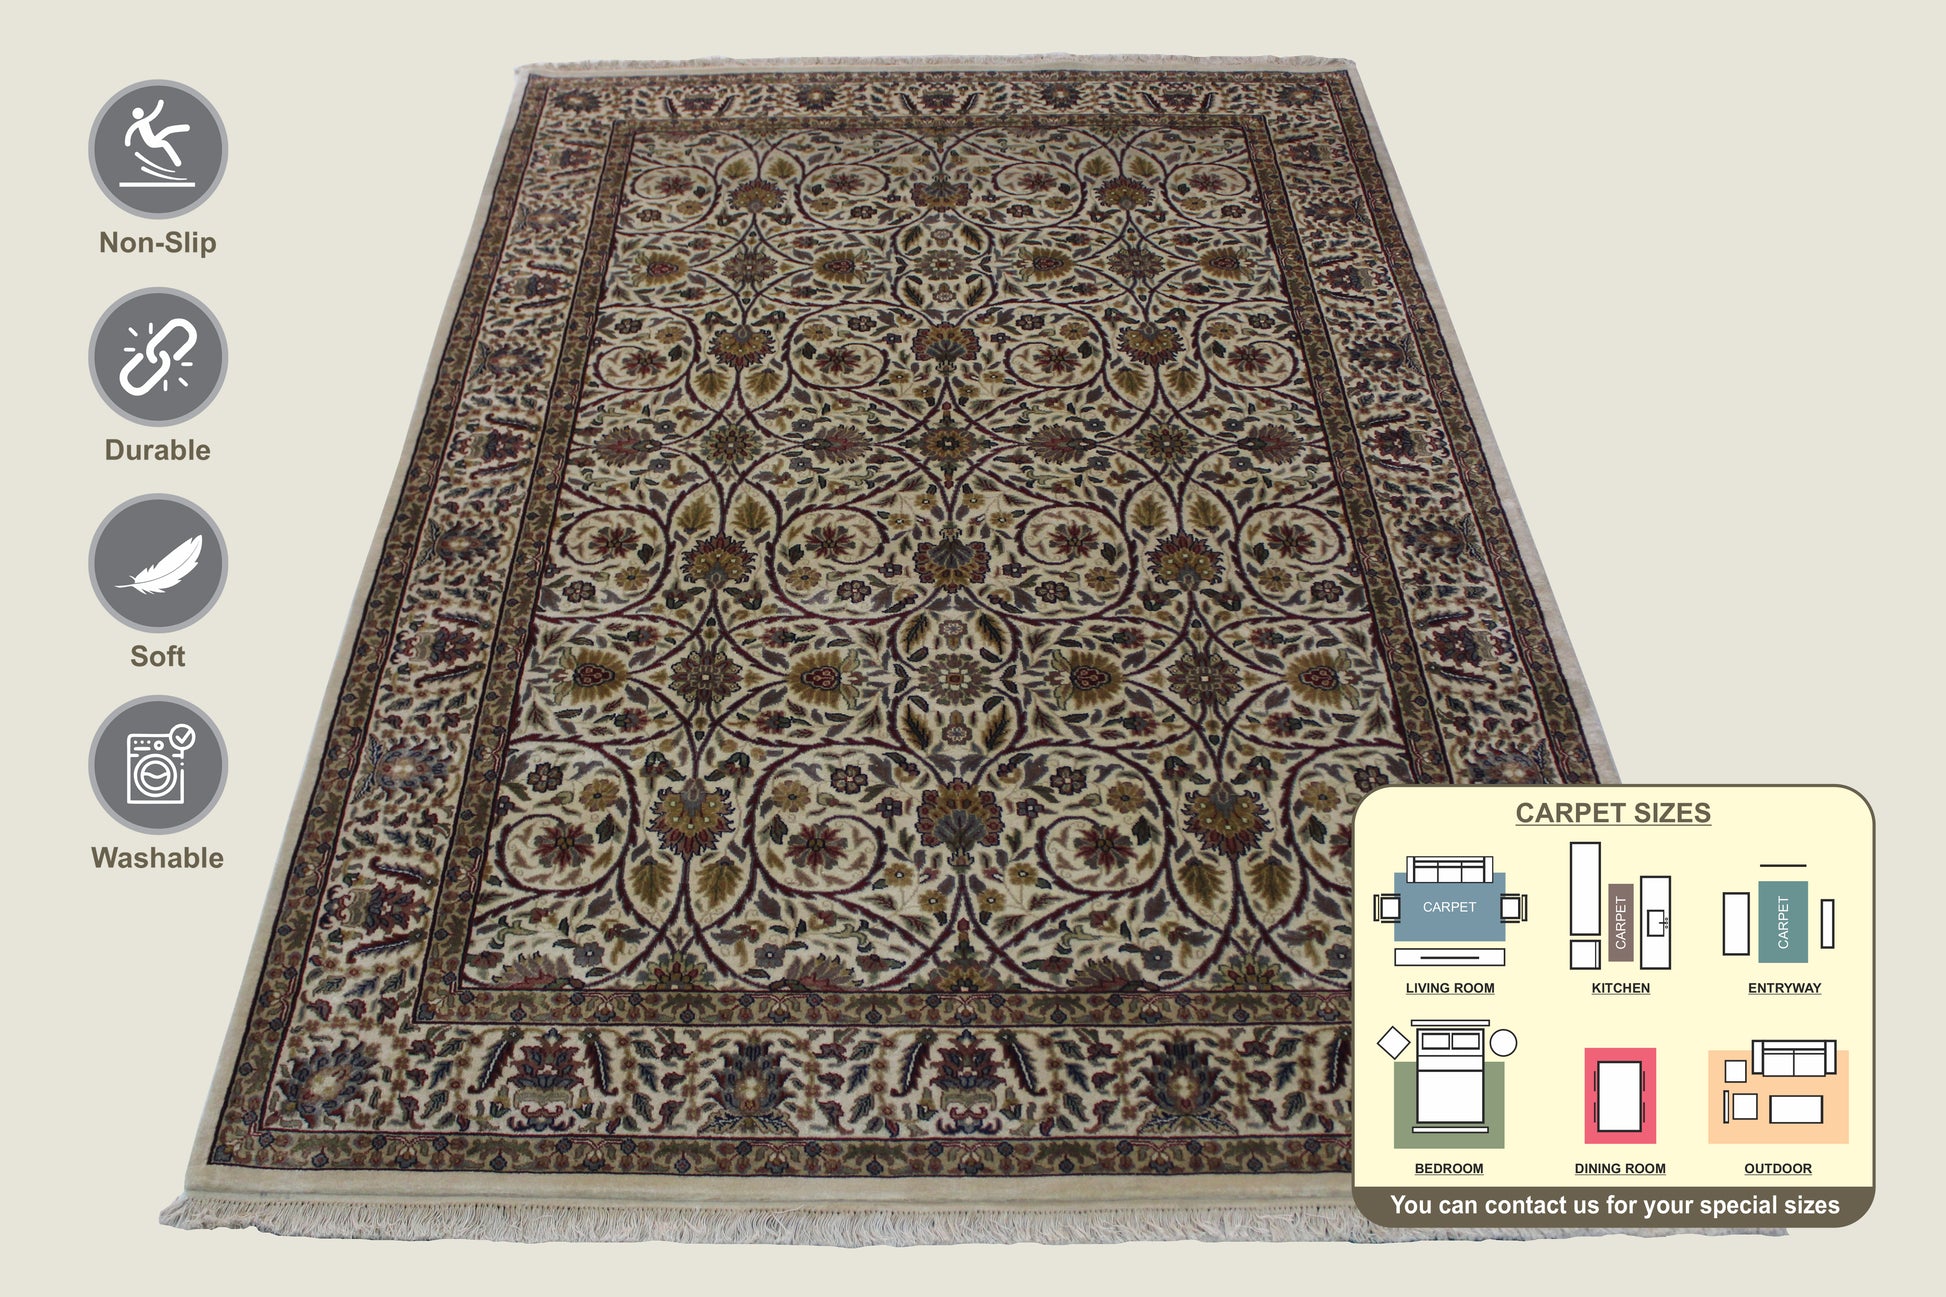 Sultanabad Area Rug 267cm x 186cm